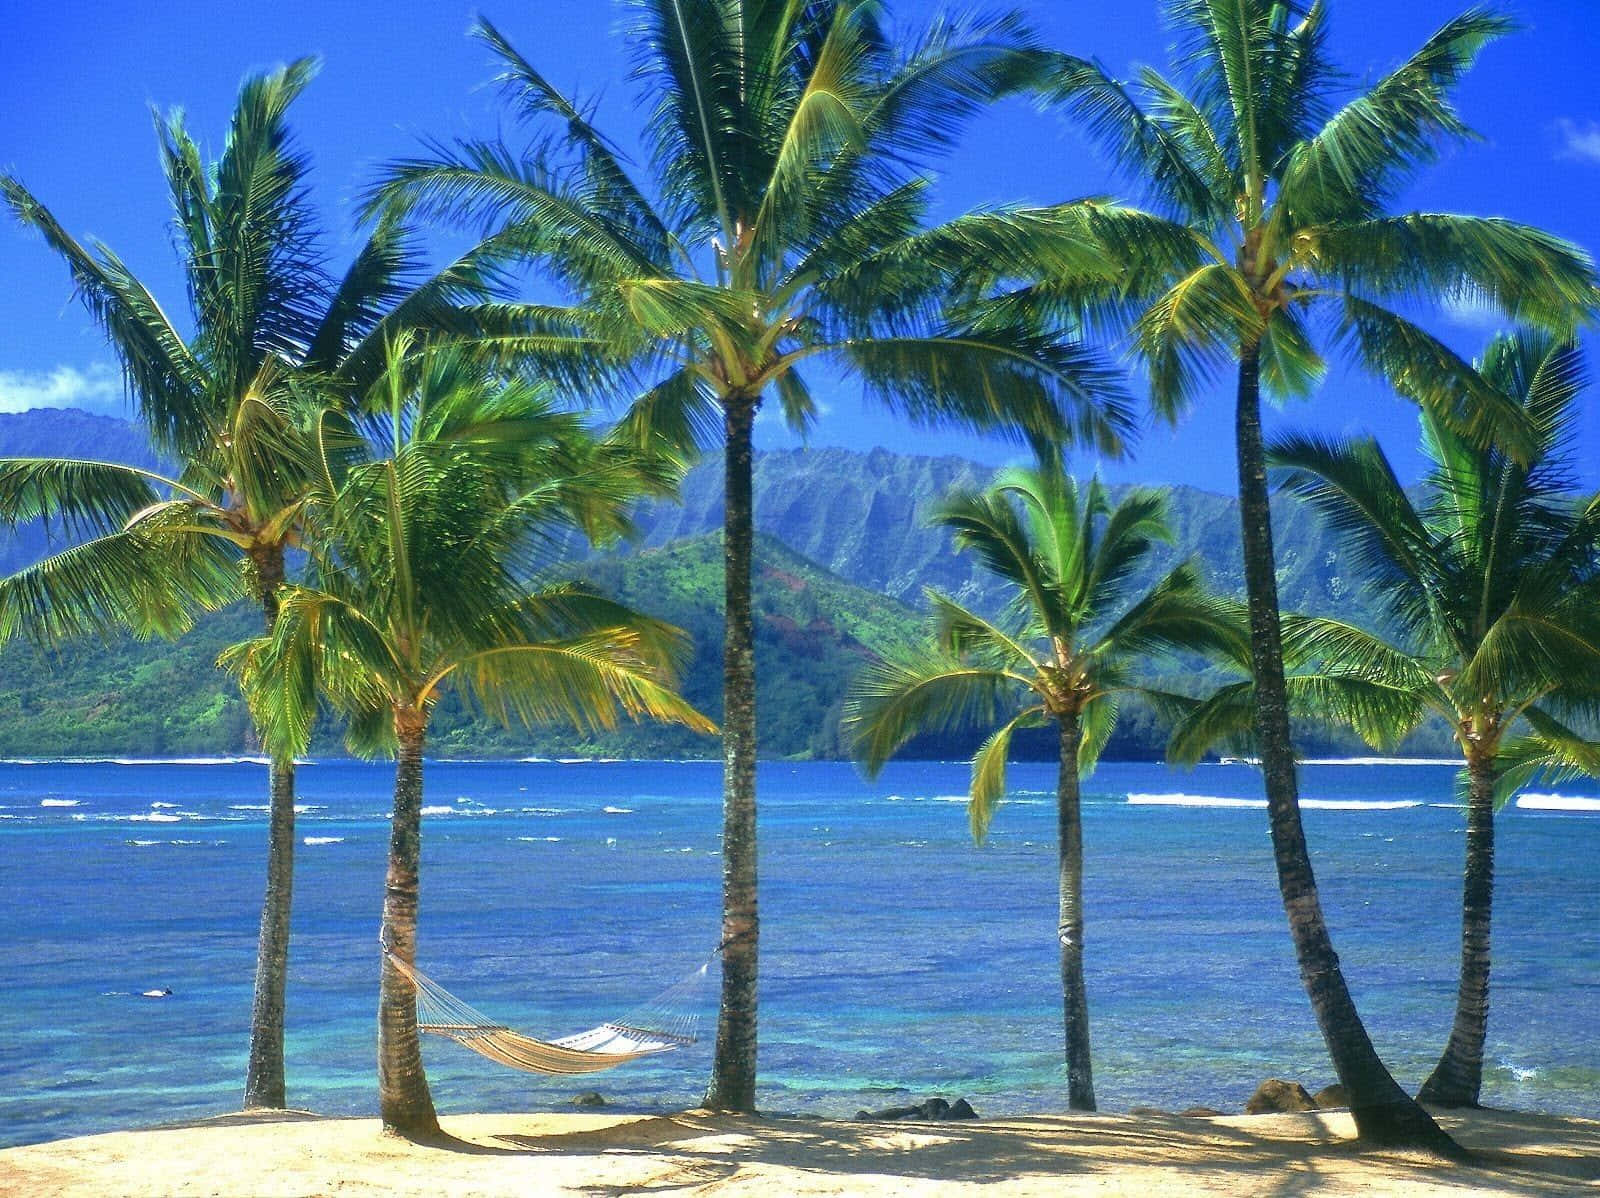 Spruce up your next beach vacation with a stay beneath a gorgeous Coconut Tree!